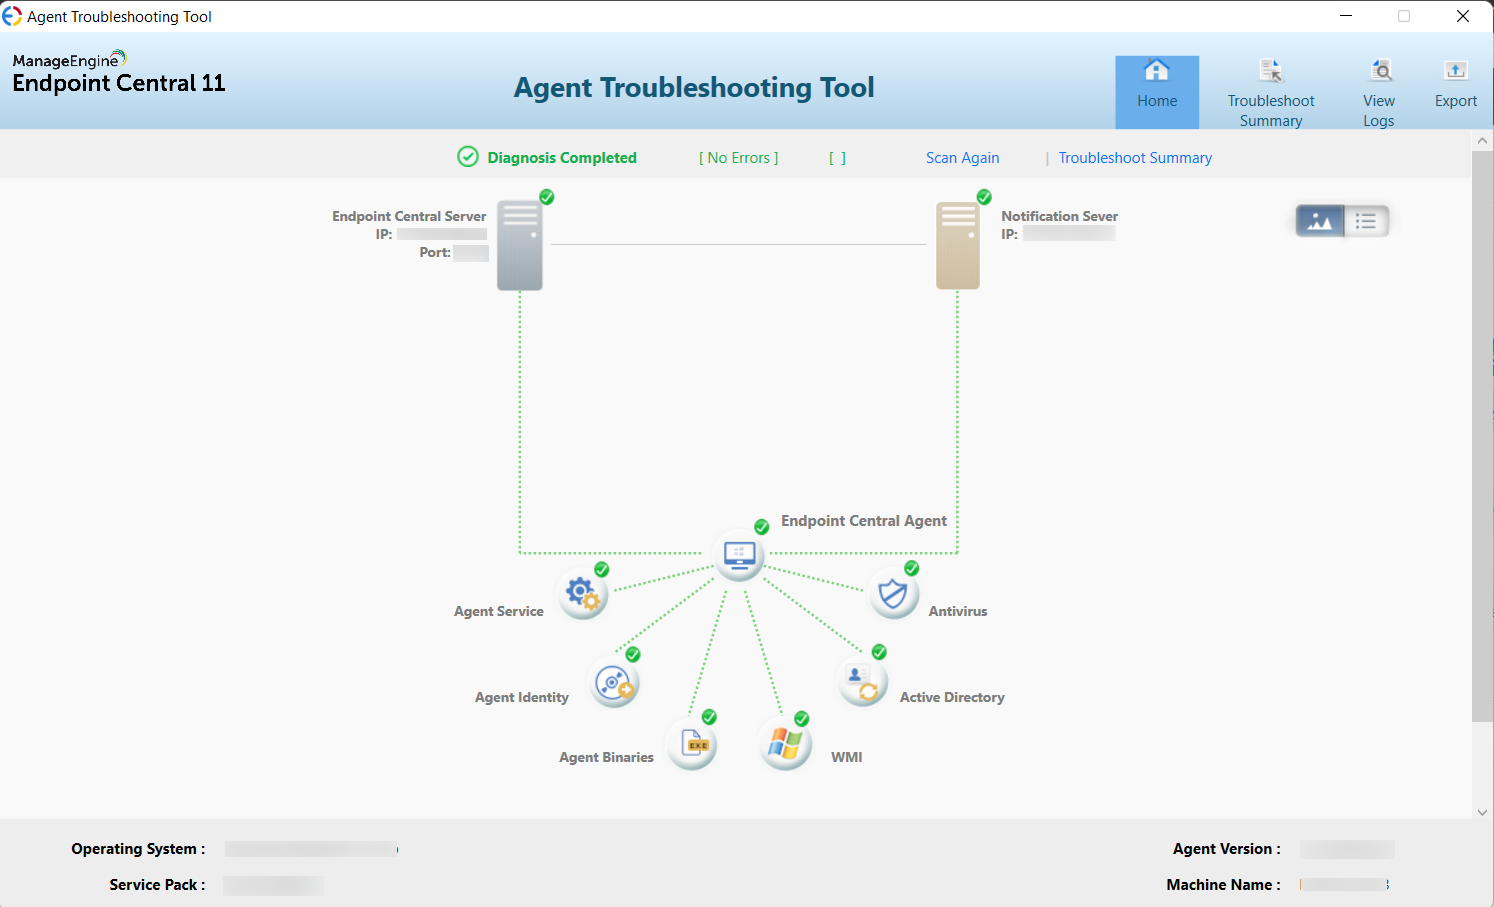 Agent Troubleshooting tool powered by Endpoint Central